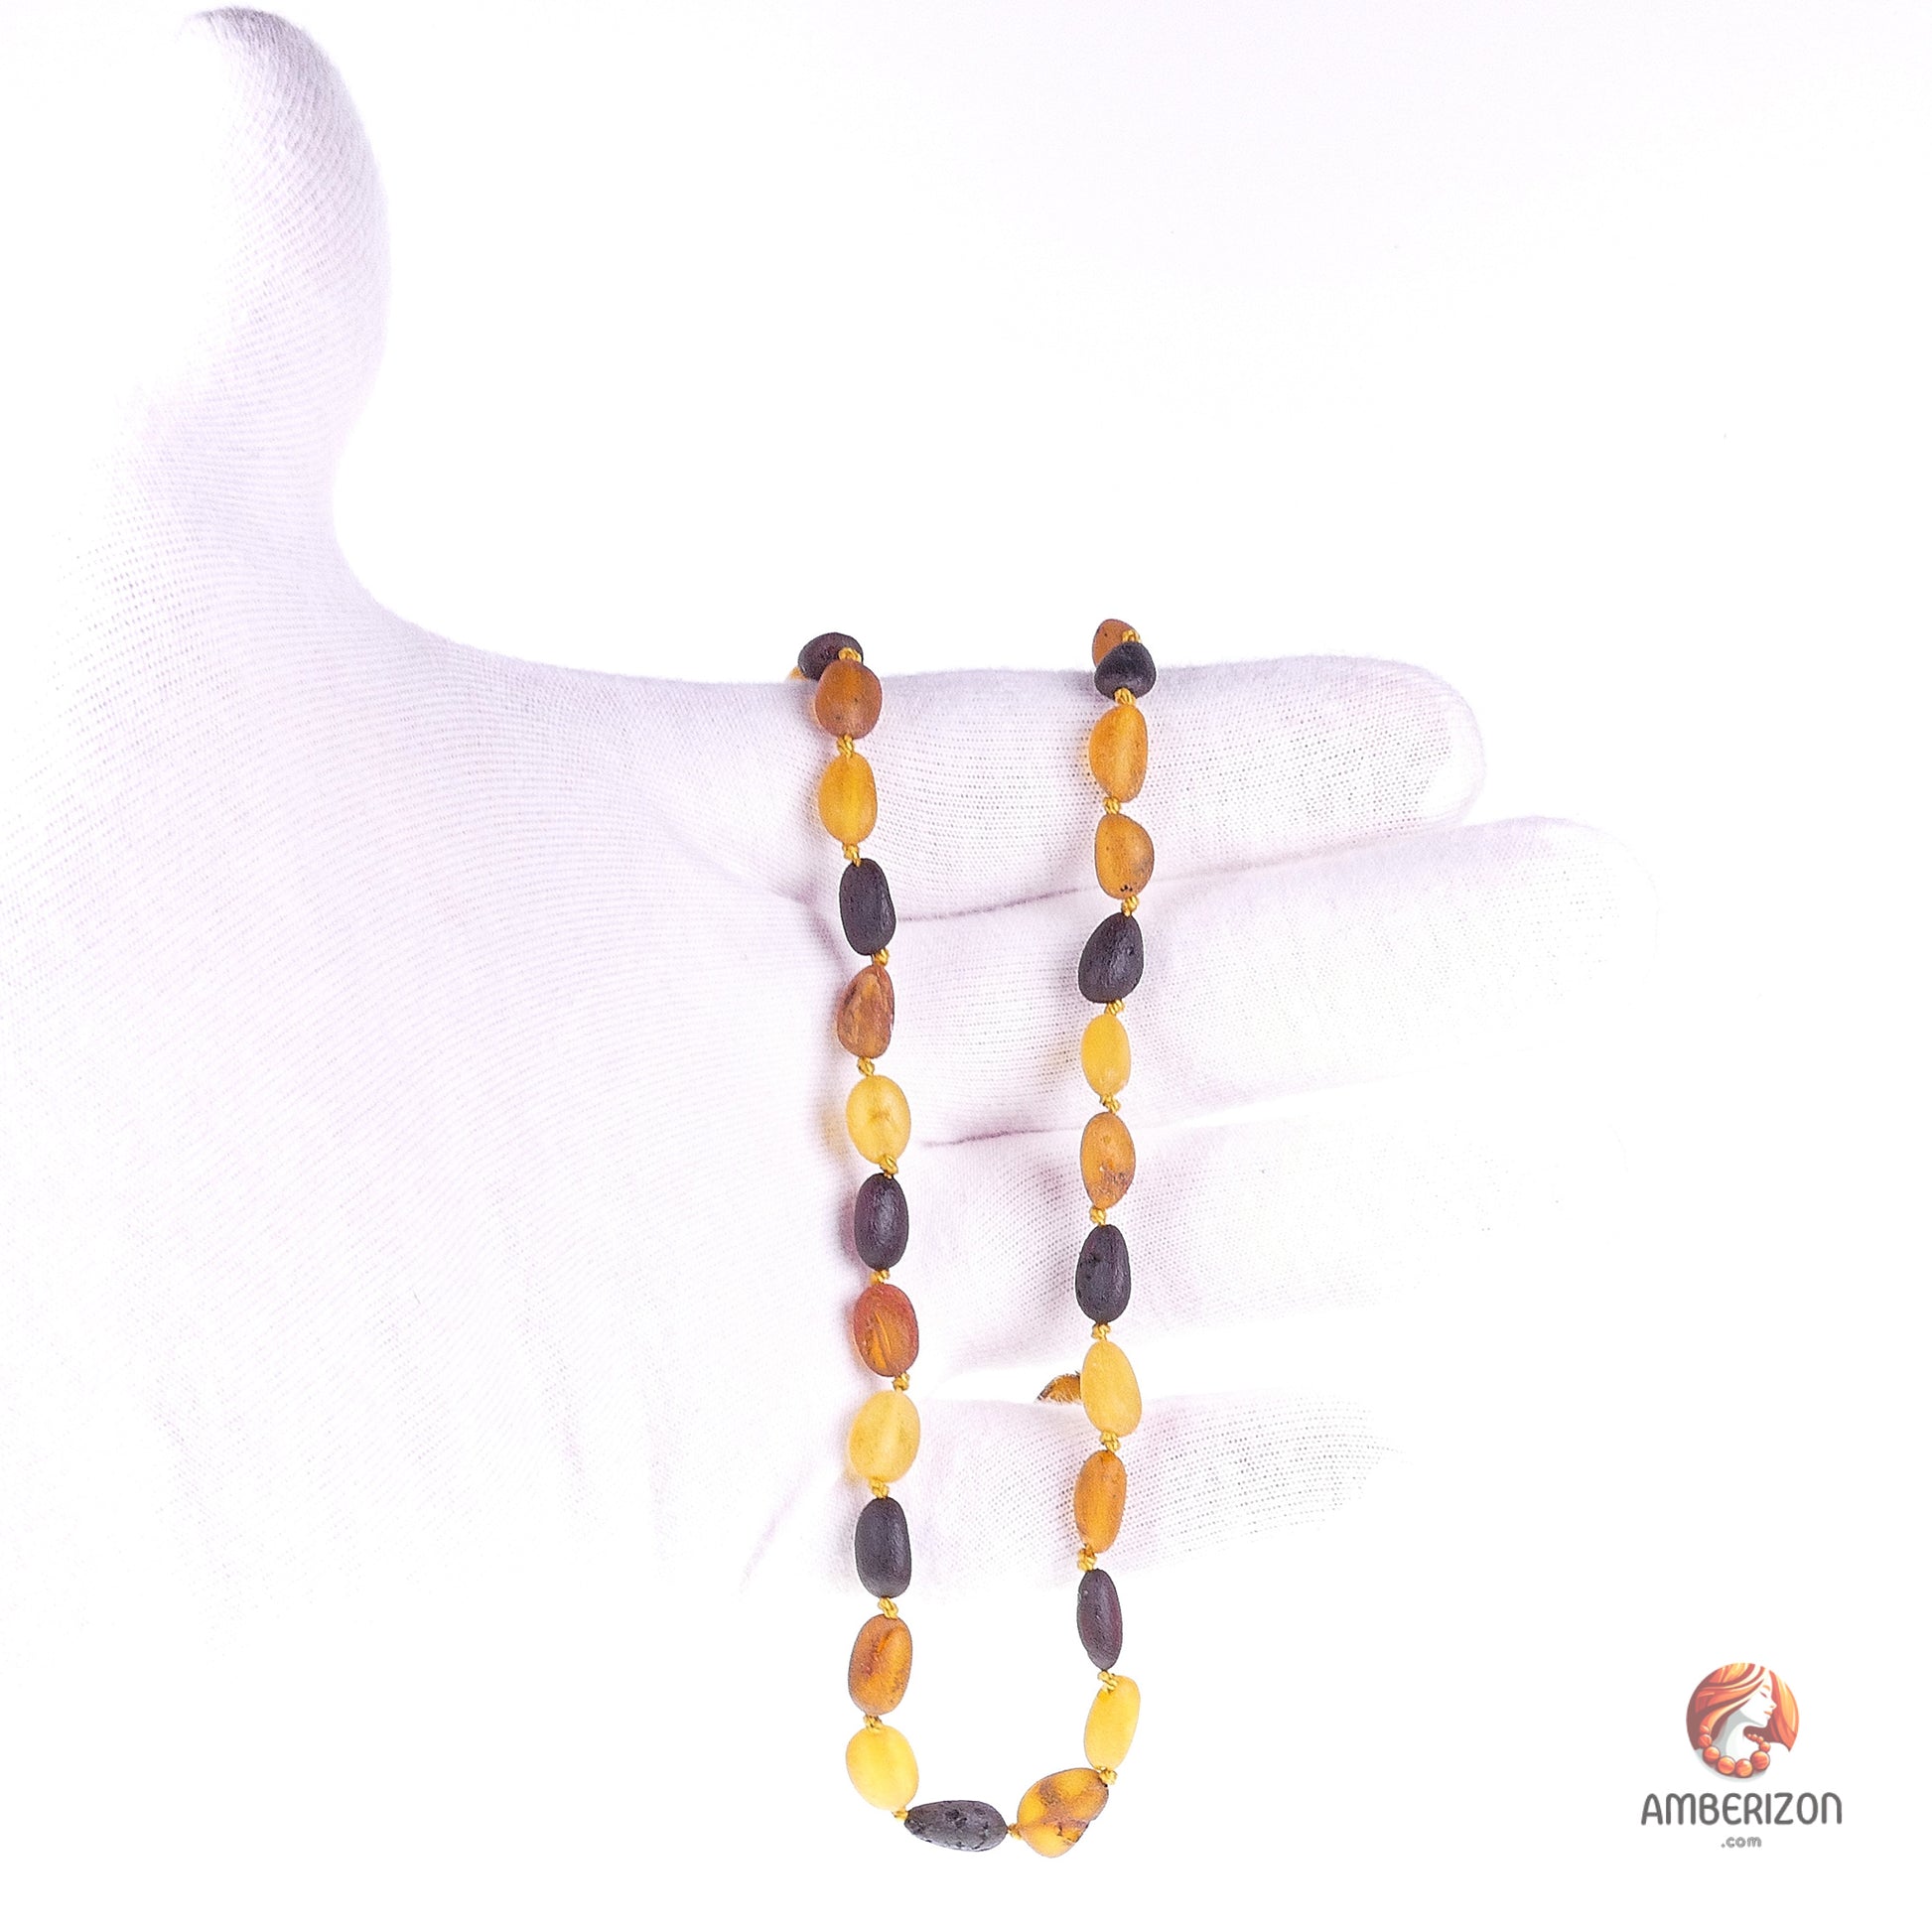 Certified Authentic Unisex Baltic Amber Necklace - Twist Barrel Clasp